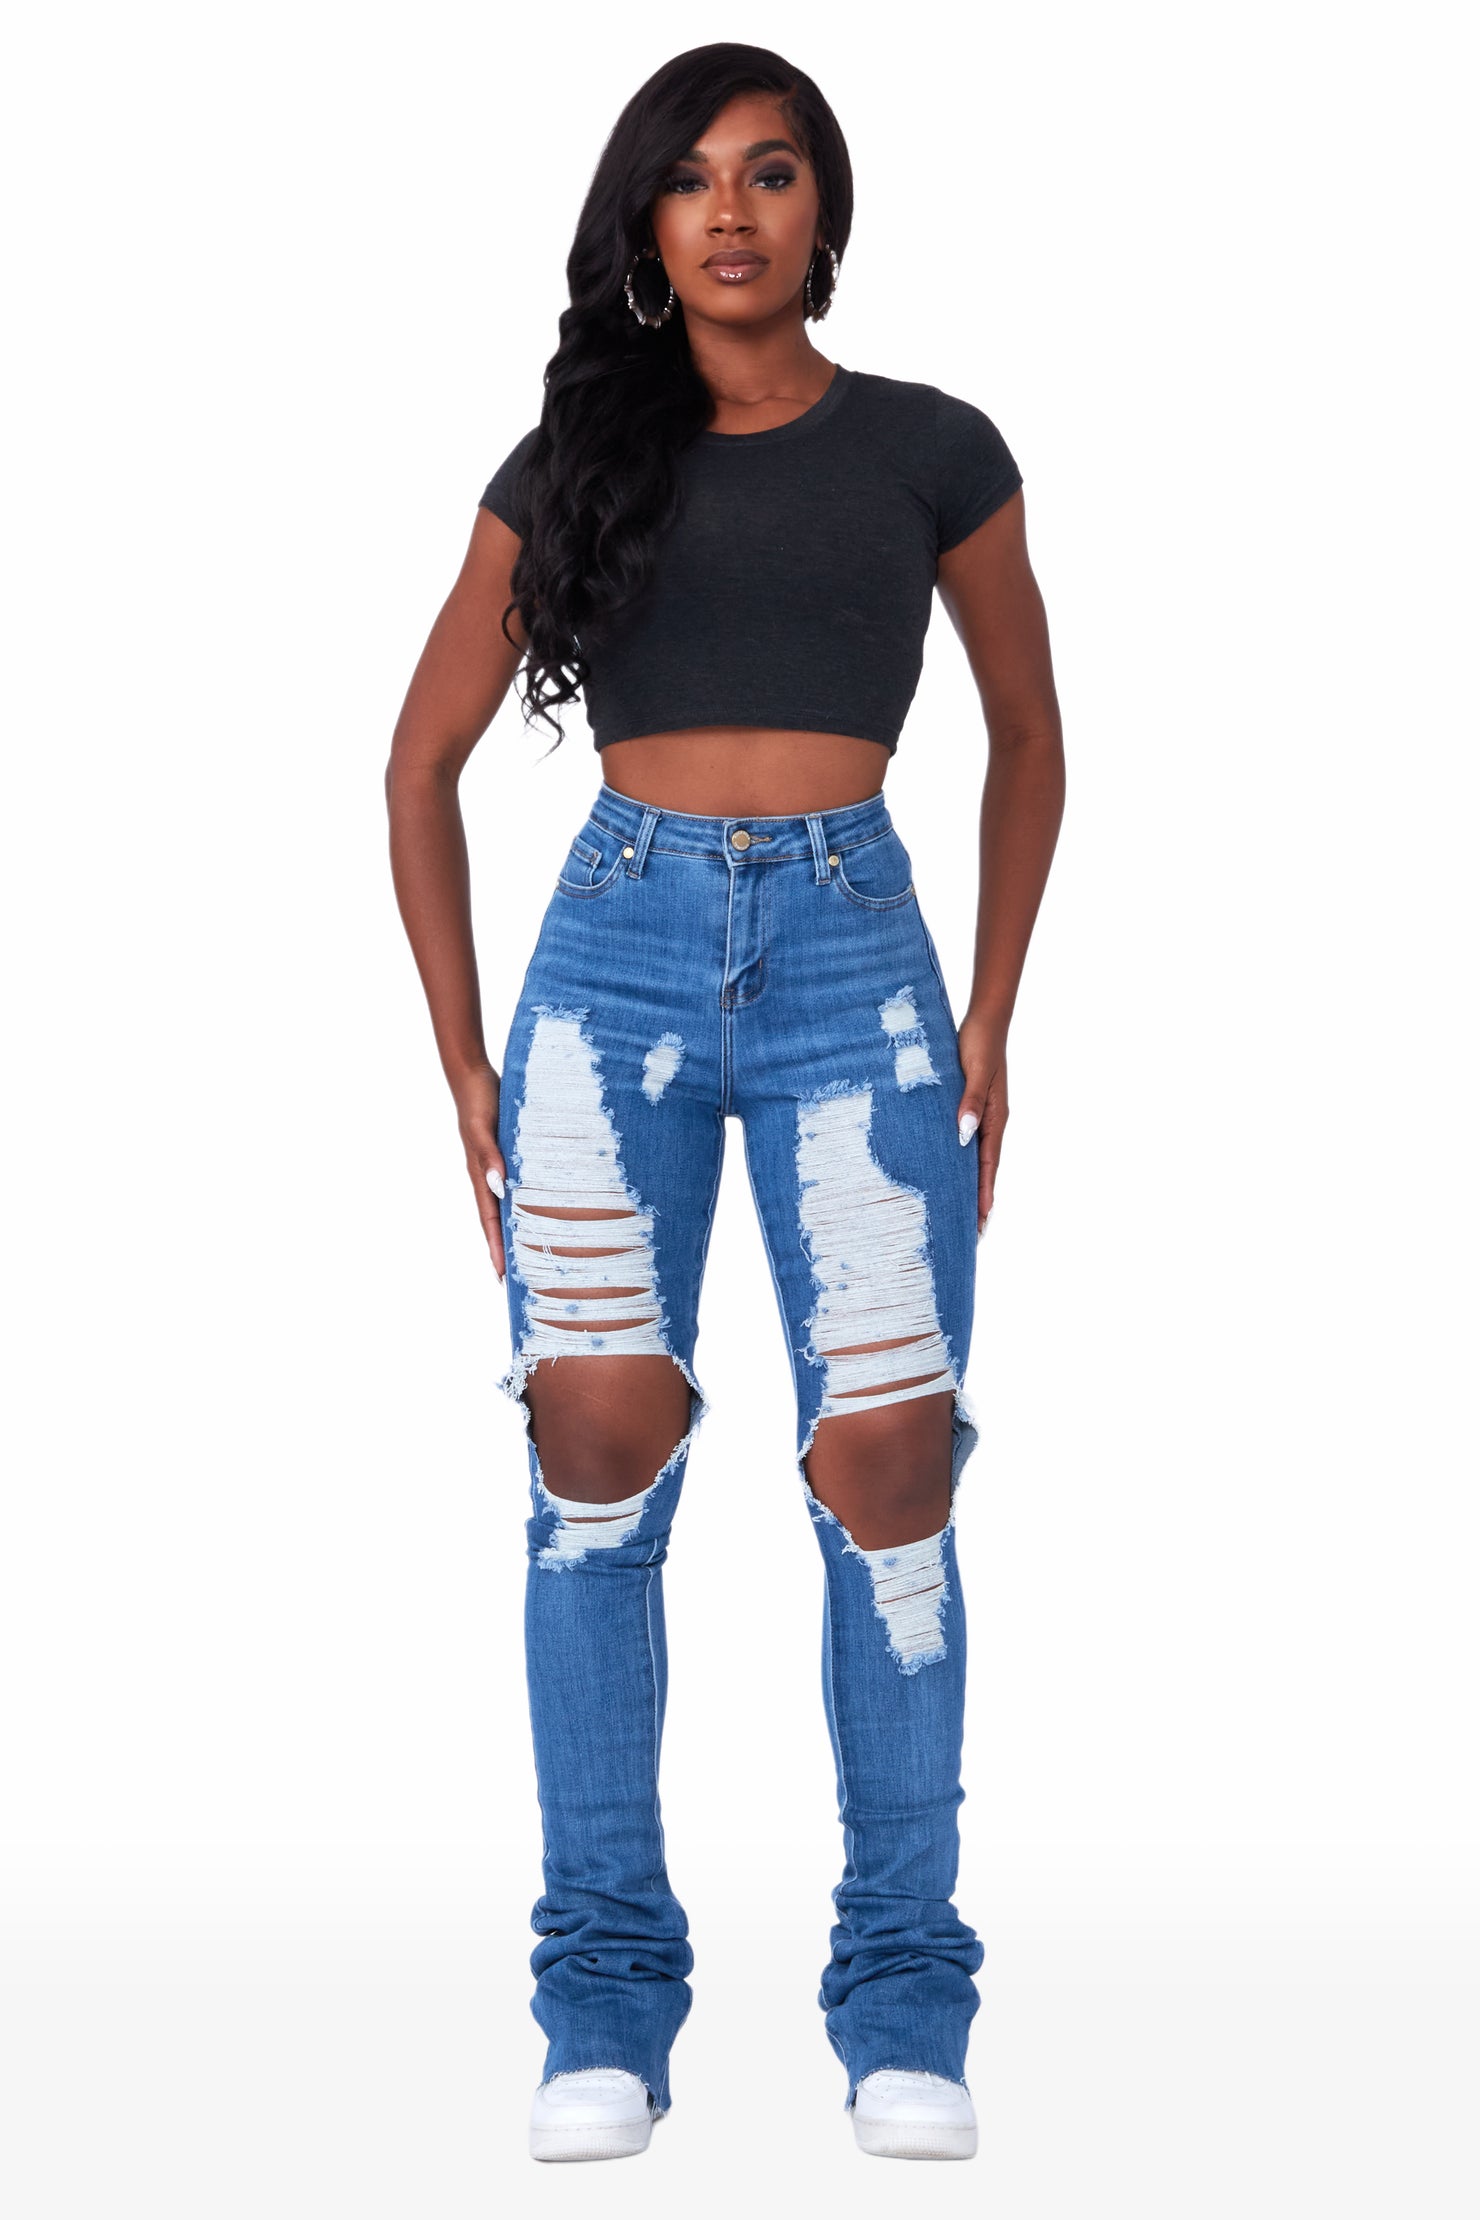 Get ready then turn heads w Rockstar Womens Jeans 👖 Find stacked